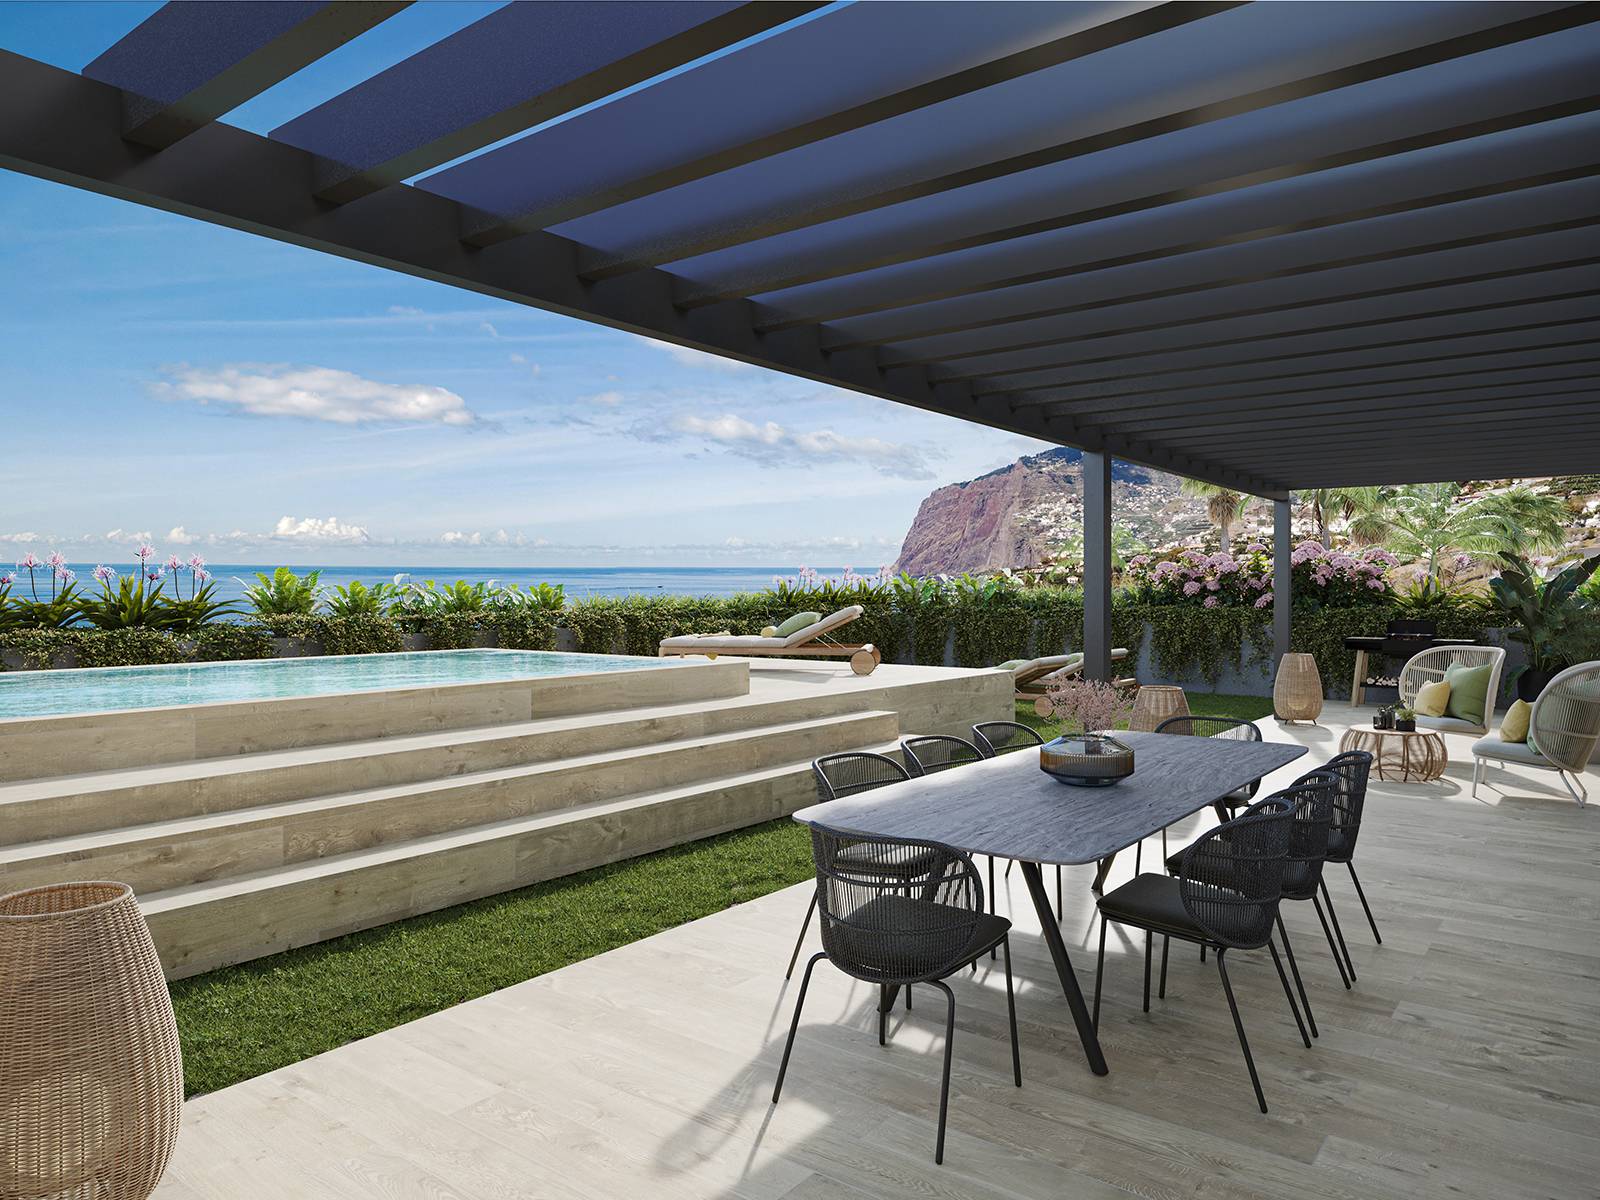 1 to 4 Bedroom Apartments - Sophisticated, elegant and modern in a exclusive condominium in Madeira